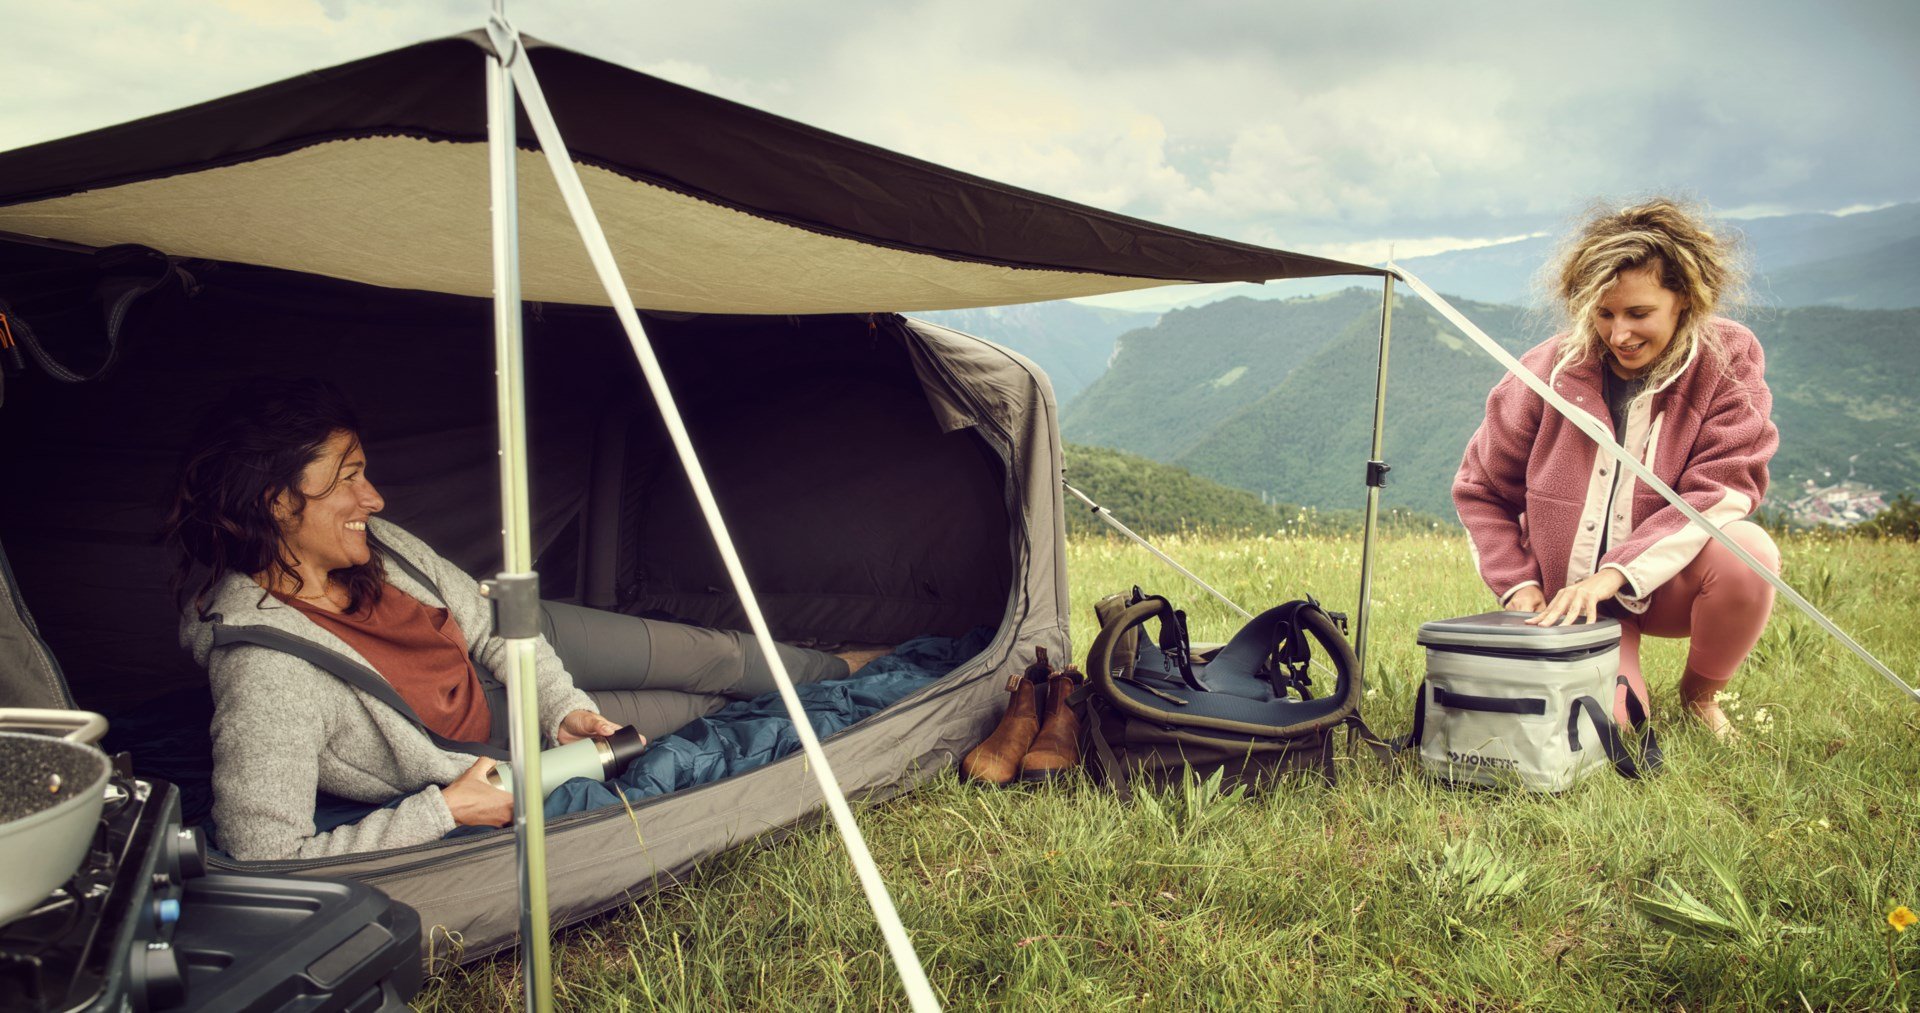 2 women at a campsite in the mountains with an assortment of Dometic products